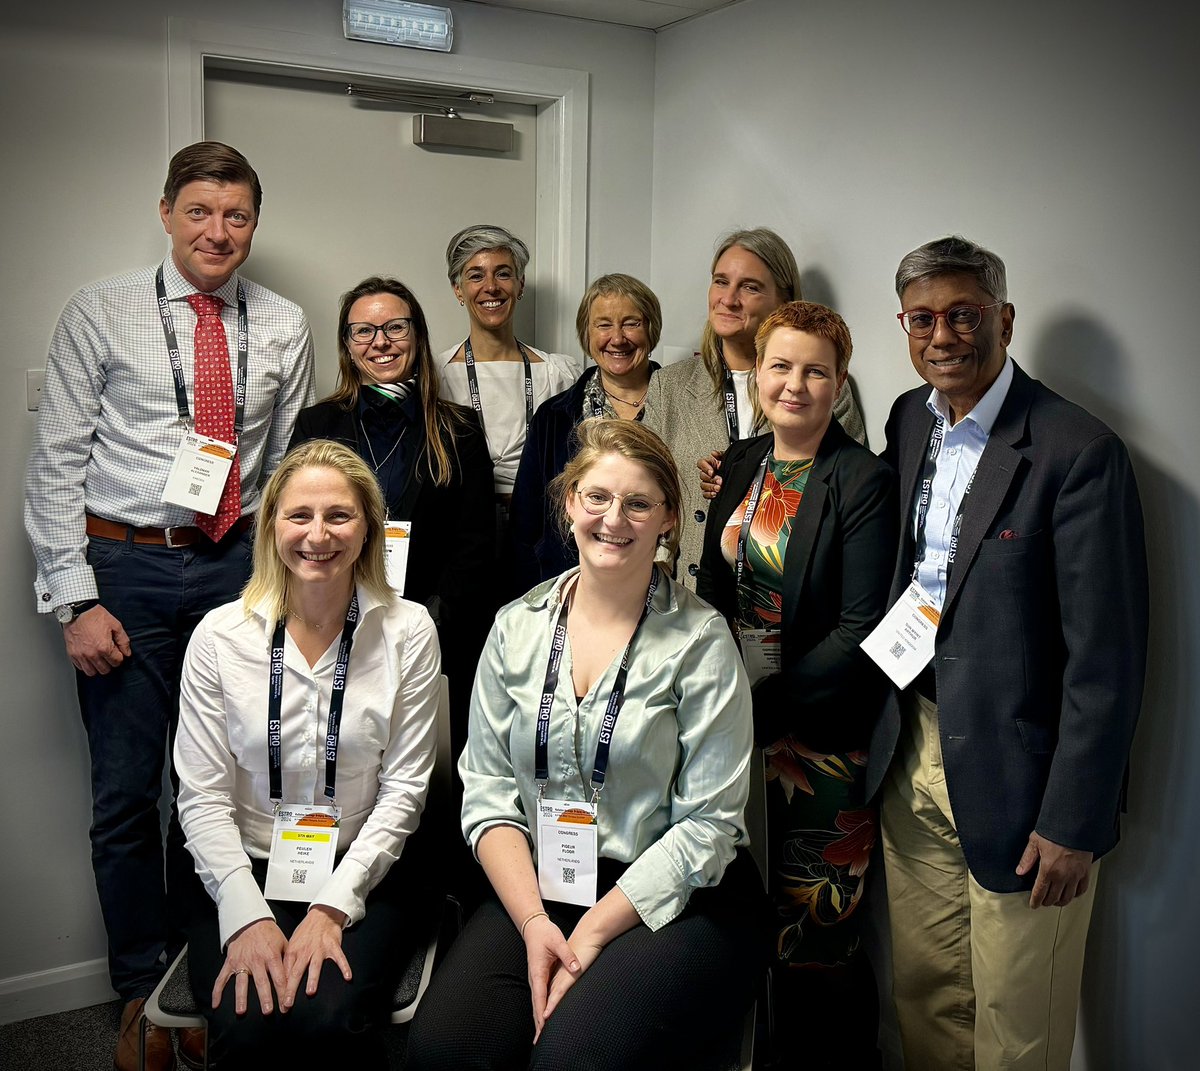 Sunday at #ESTRO24 was guidelines & working groups for me! Excellent meetings with the 🔹Lower GI guideline committee 🔹Locally recurrent rectal cancer guidelines writing group 🔹Reirradiation #medphys working group Here the LRRC group, expertly led by Heike Peulen #radonc